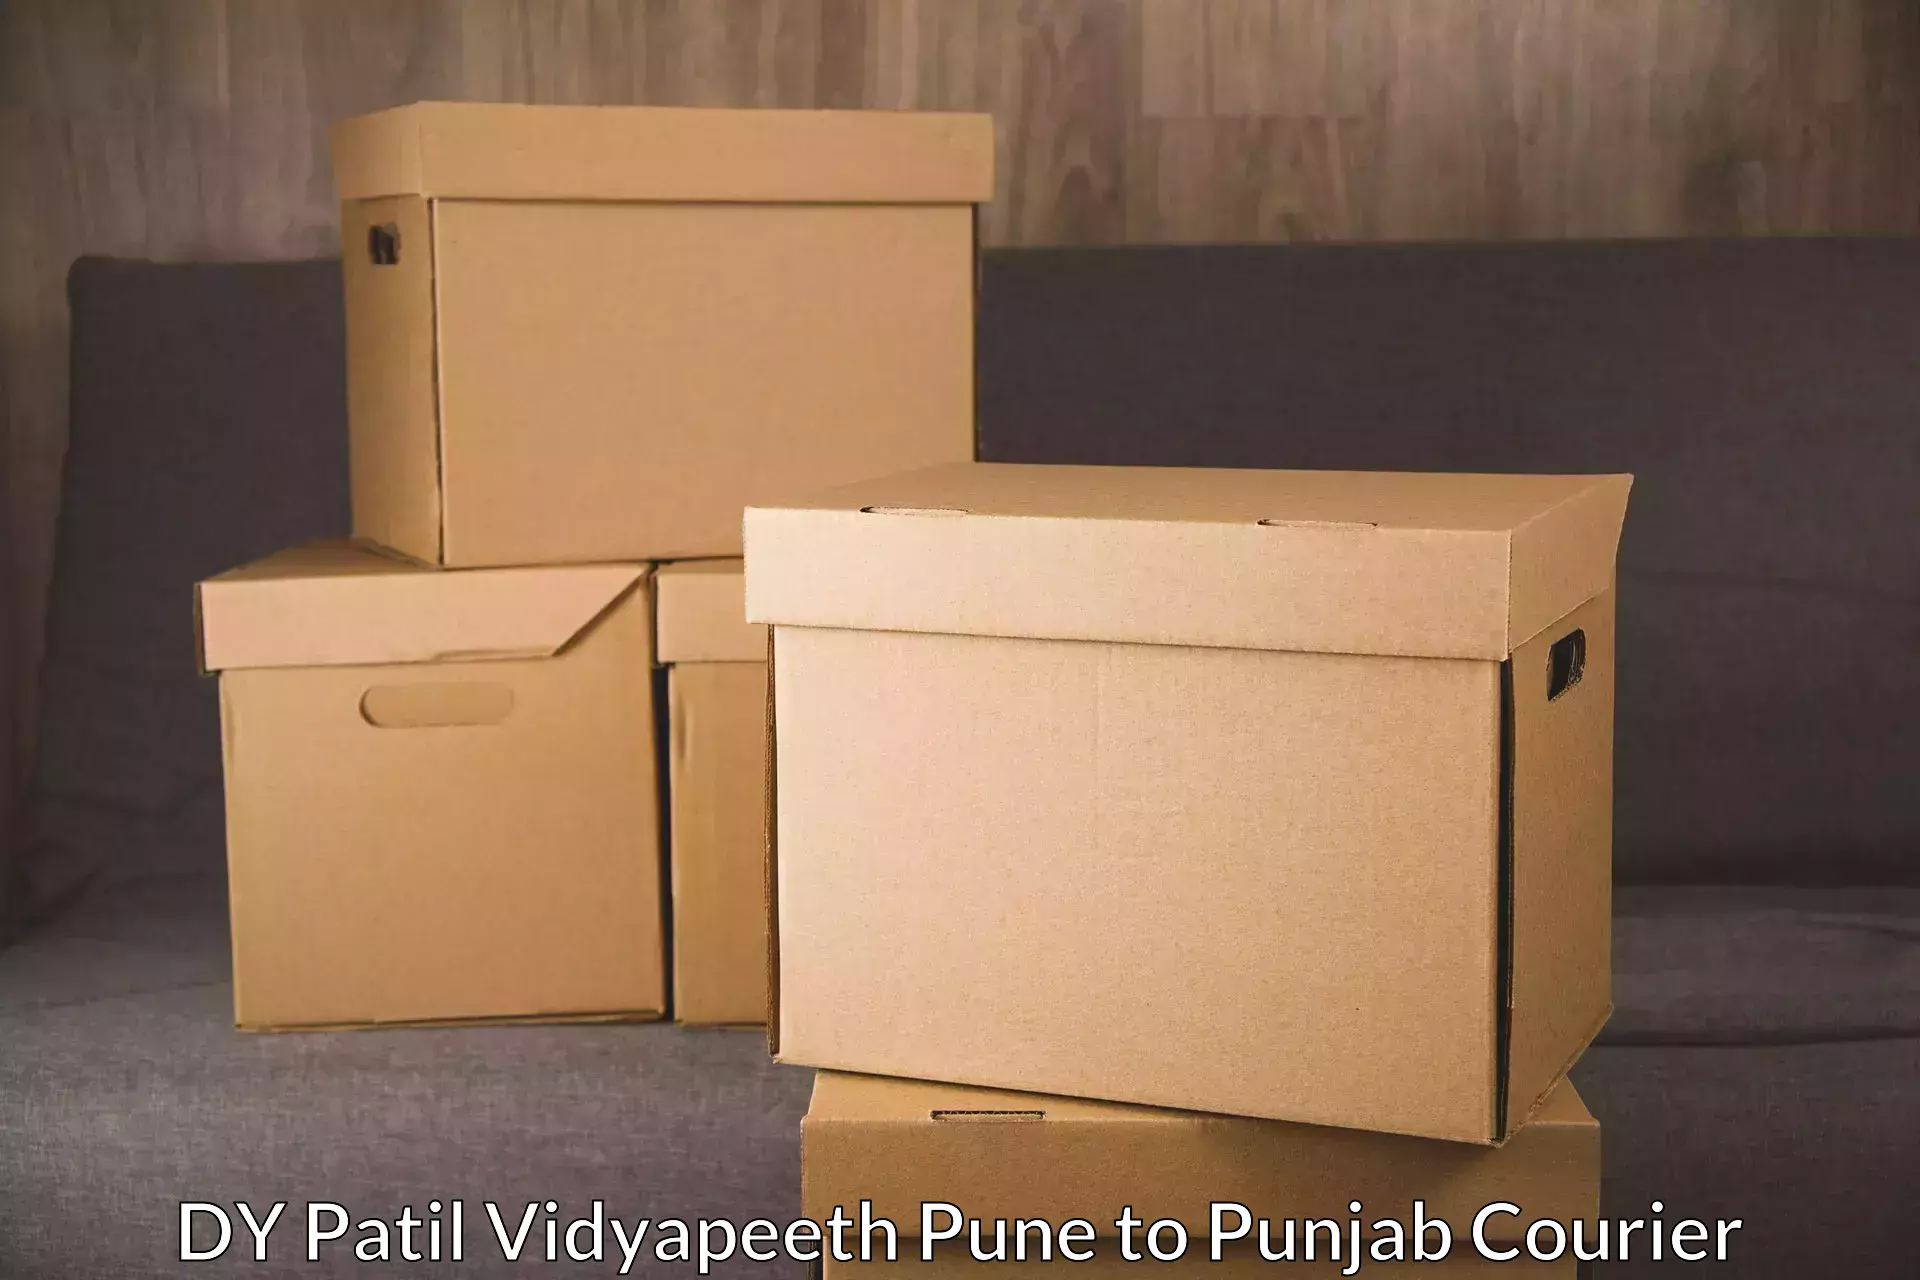 Small business couriers DY Patil Vidyapeeth Pune to Patiala